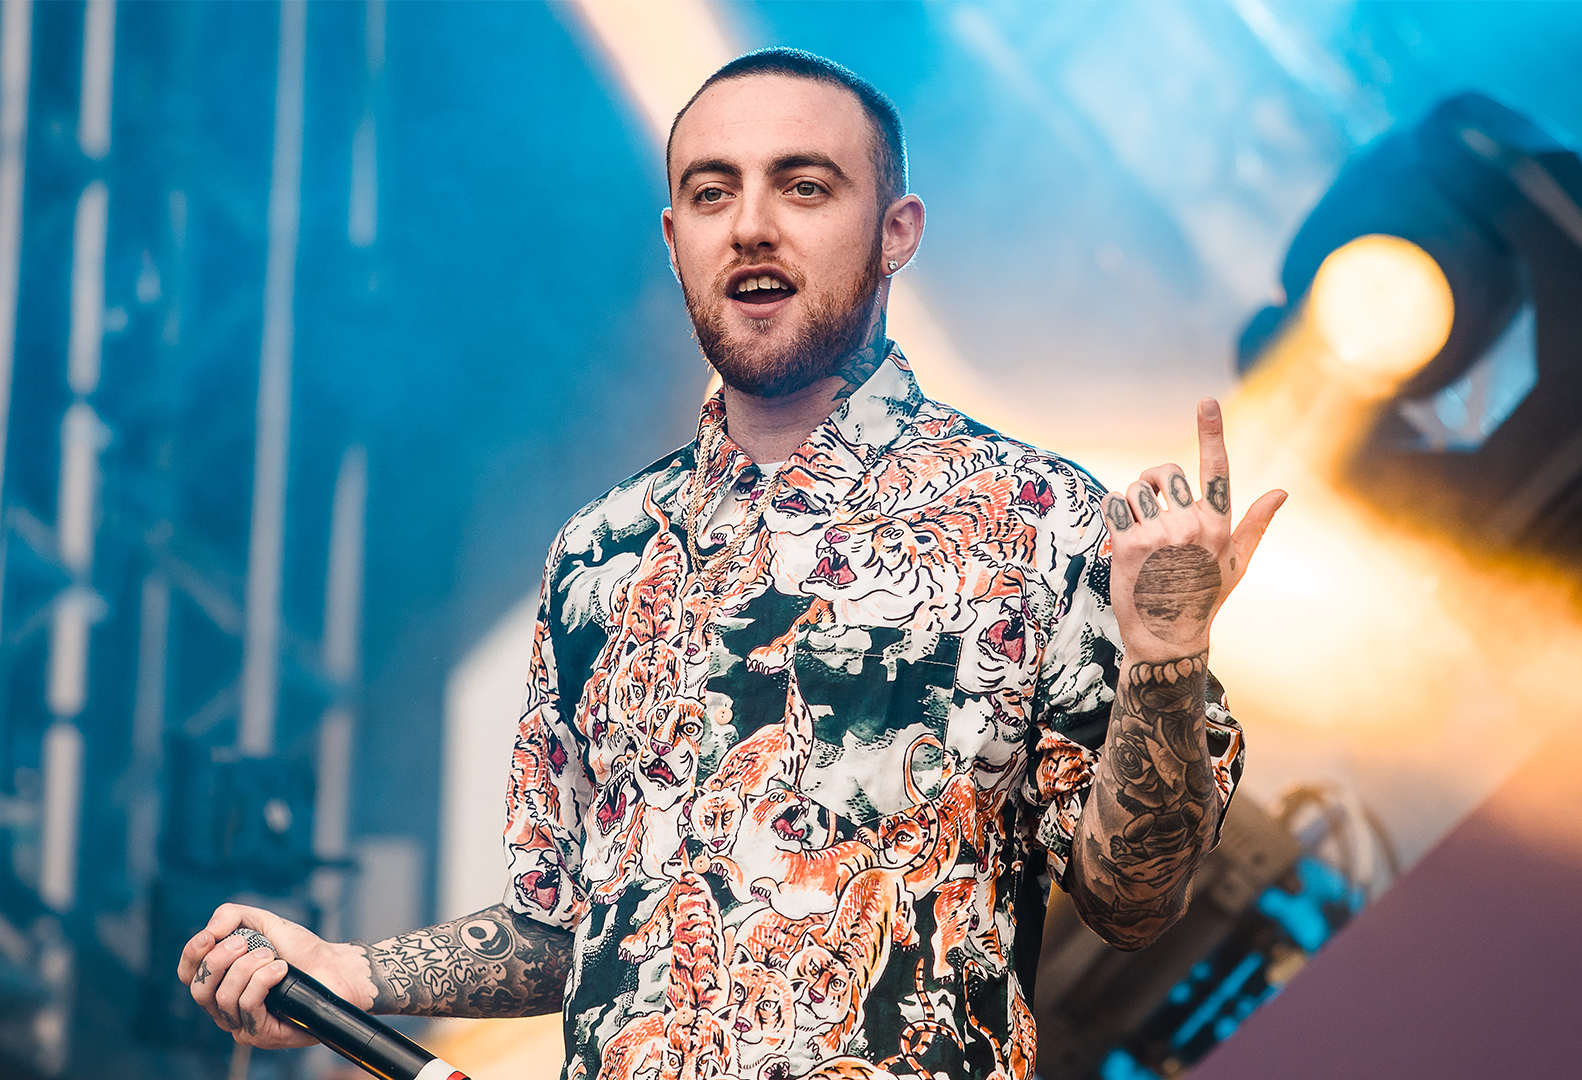 Mac Miller Fund To Award $75K In Grants To Black, Indigenous, Artists Of Color